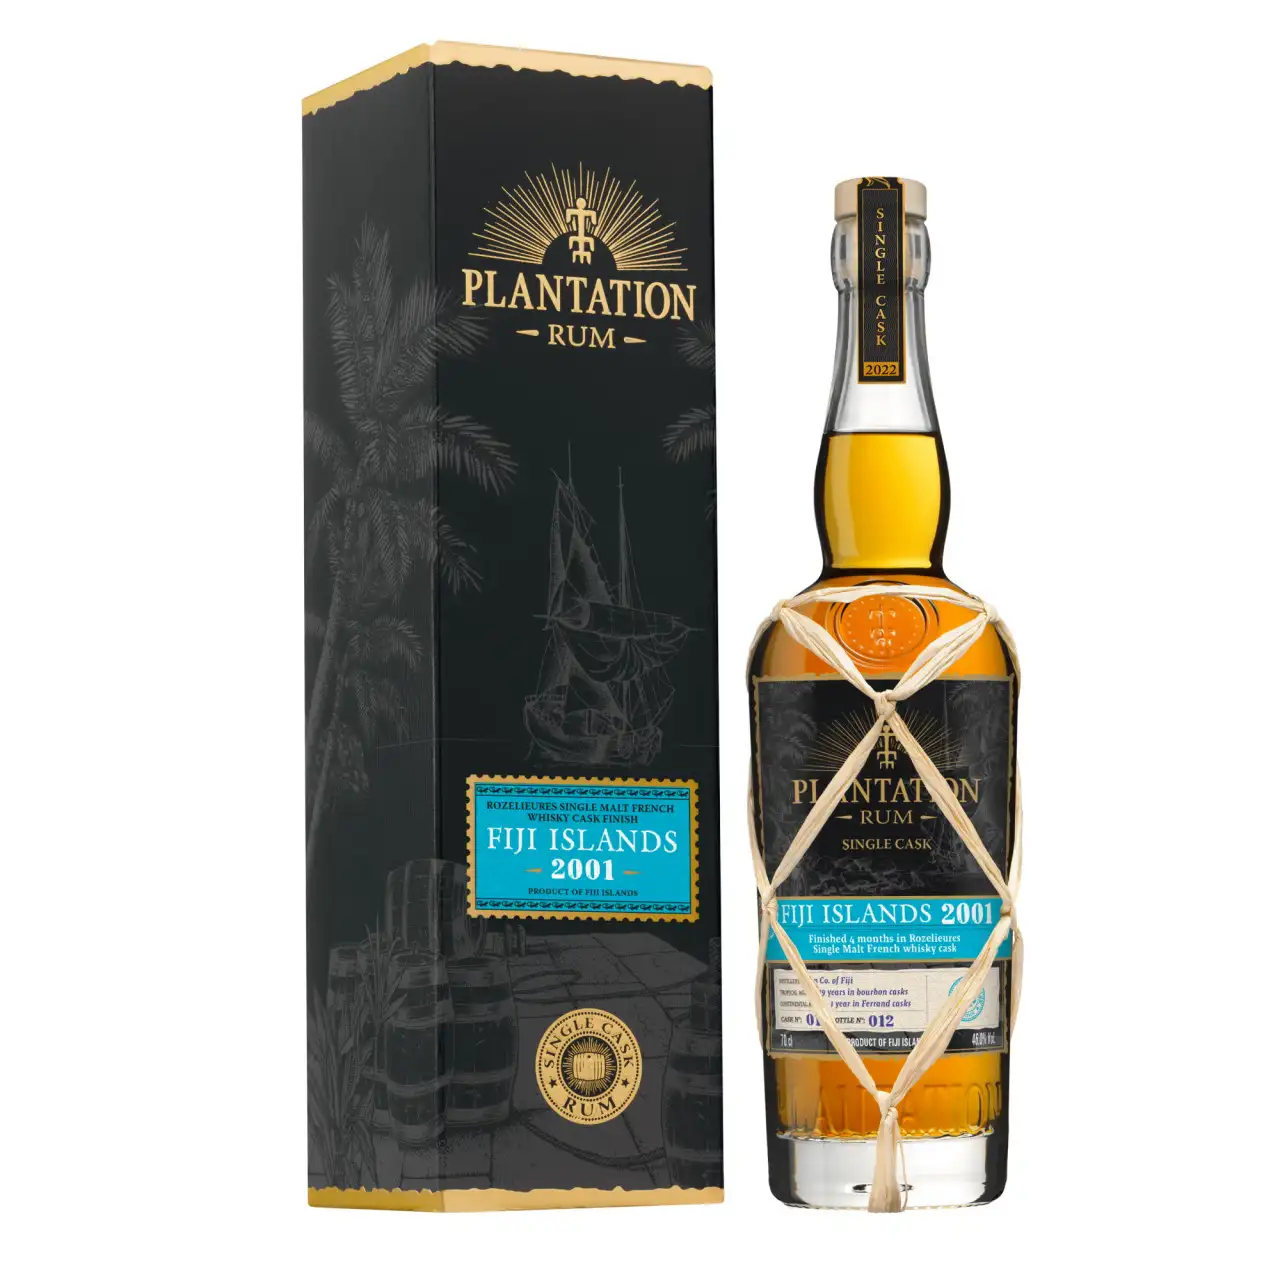 Image of the front of the bottle of the rum Plantation Fiji Islands